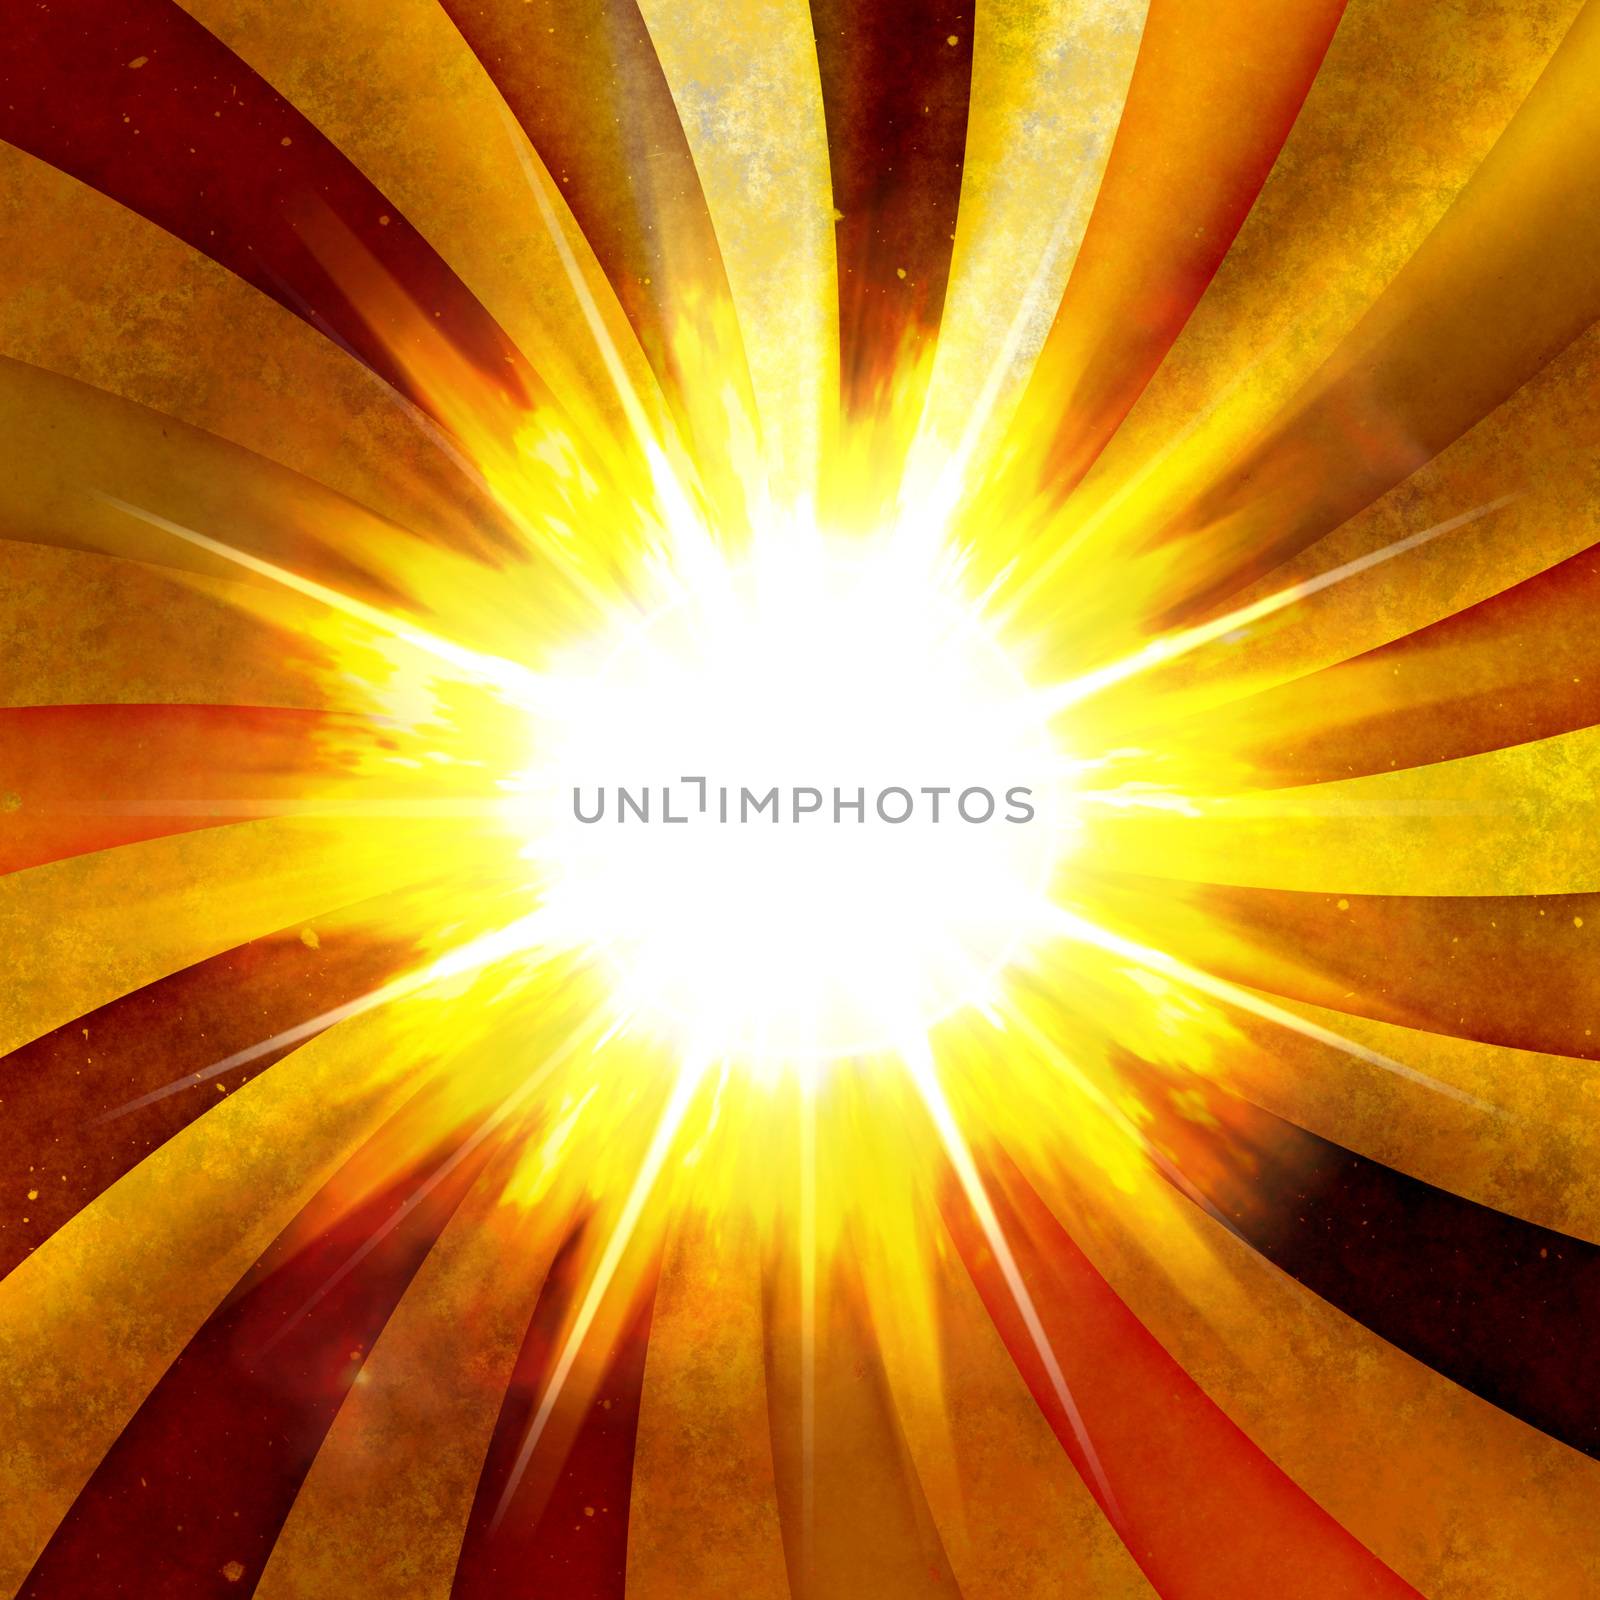 A fiery abstract radial burst illustration speeding toward a central point with copy space.